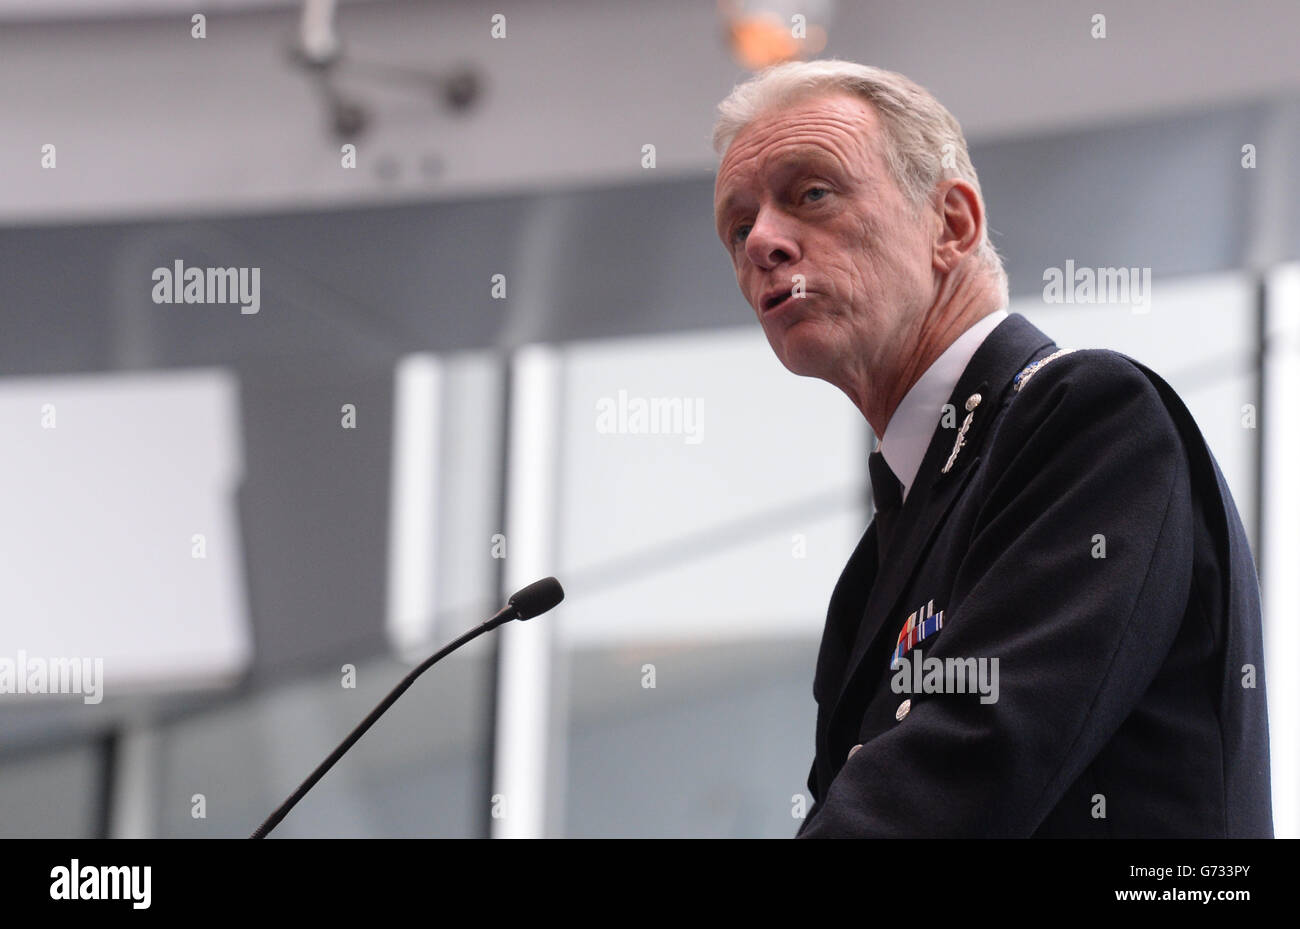 Metropolitan Police Commissioner Bernard Hogan-Howe speaks to the conference Policing Global Cities: Gangs Summit at City Hall in London, which has been set up to bring together city leaders from around the word to discuss how to tackle the problem of gangs. Stock Photo